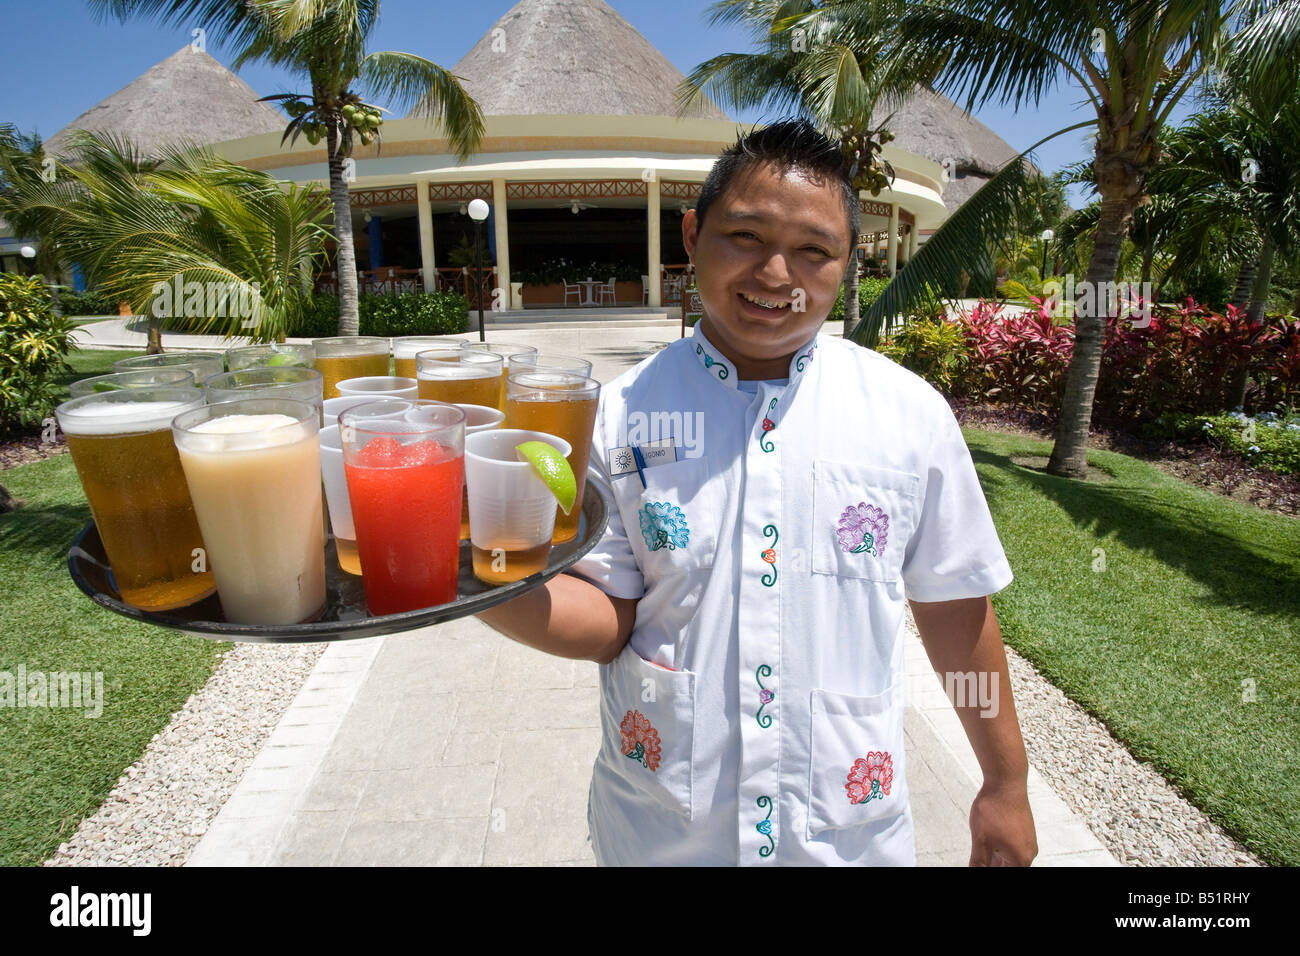 Portrait of Waiter with Tray of Drinks, Mexico Stock Photo